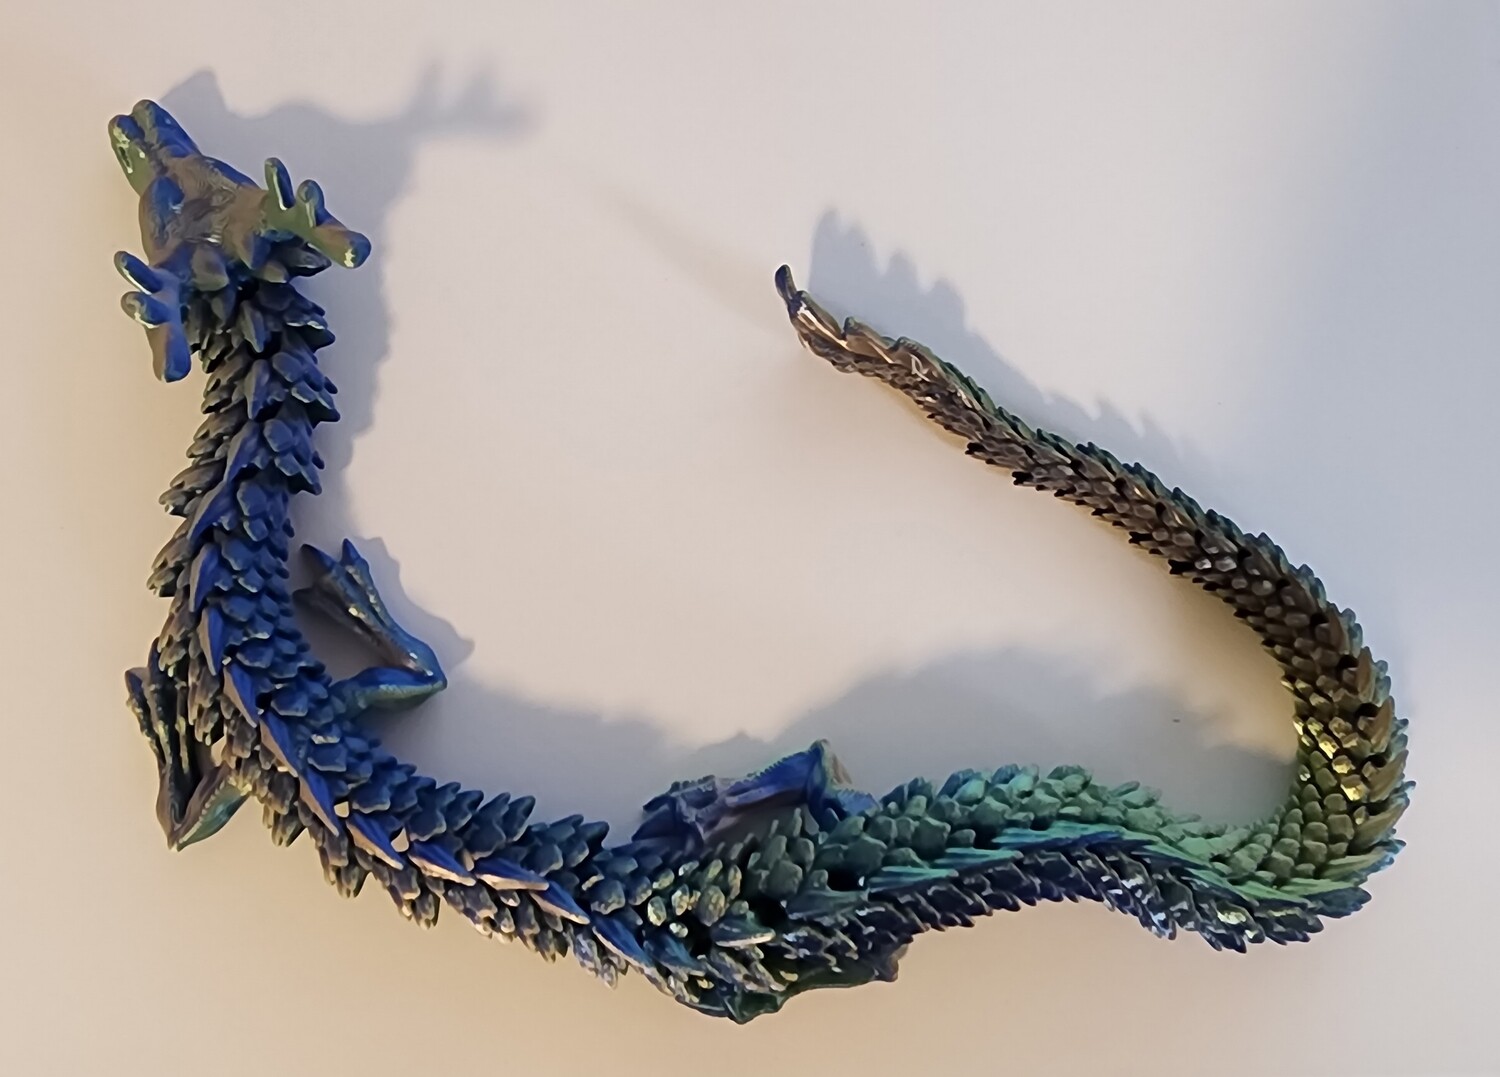 3D Printed Articulated Dragon